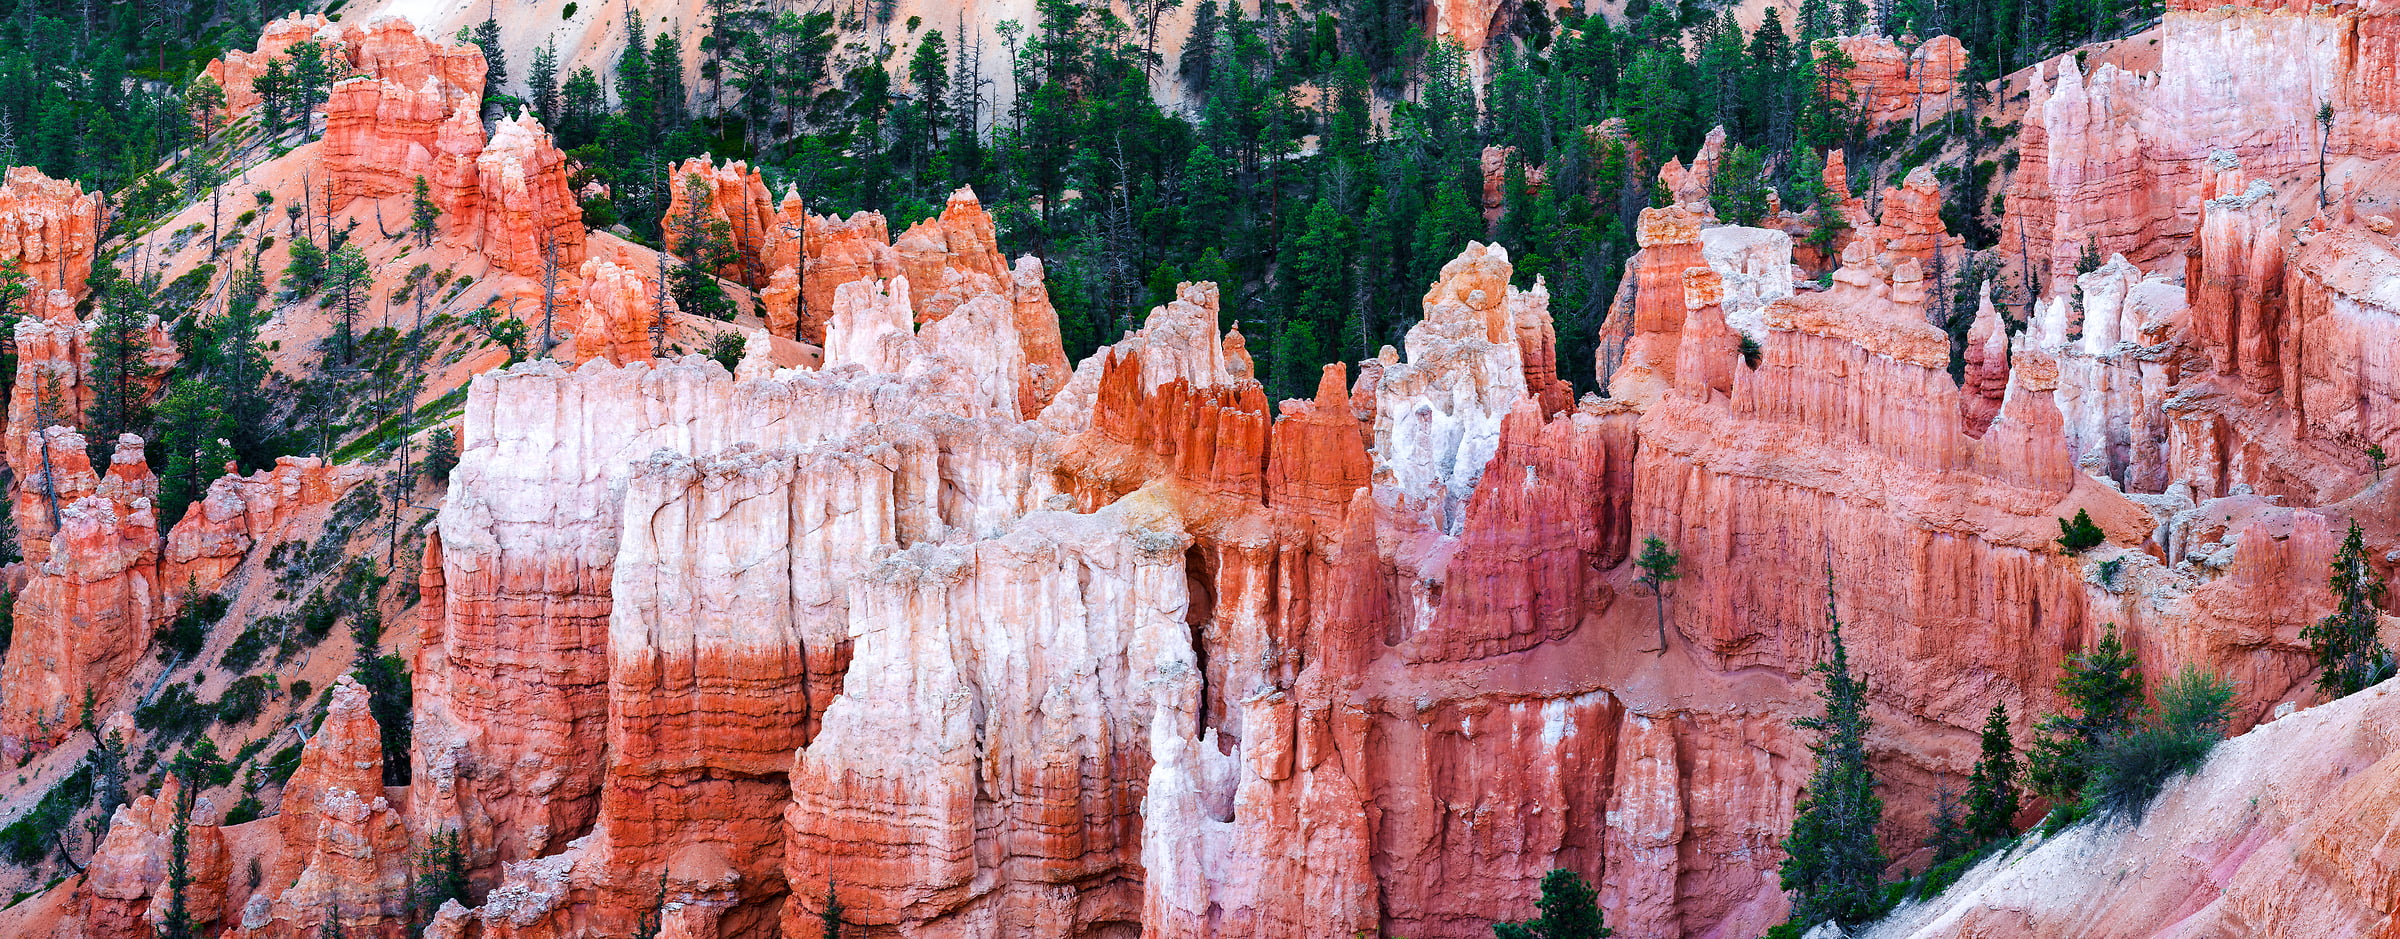 516 megapixels! A very high resolution, large-format VAST photo print of a rock formation; landscape photograph created by Jim Tarpo in Bryce Canyon, Utah.